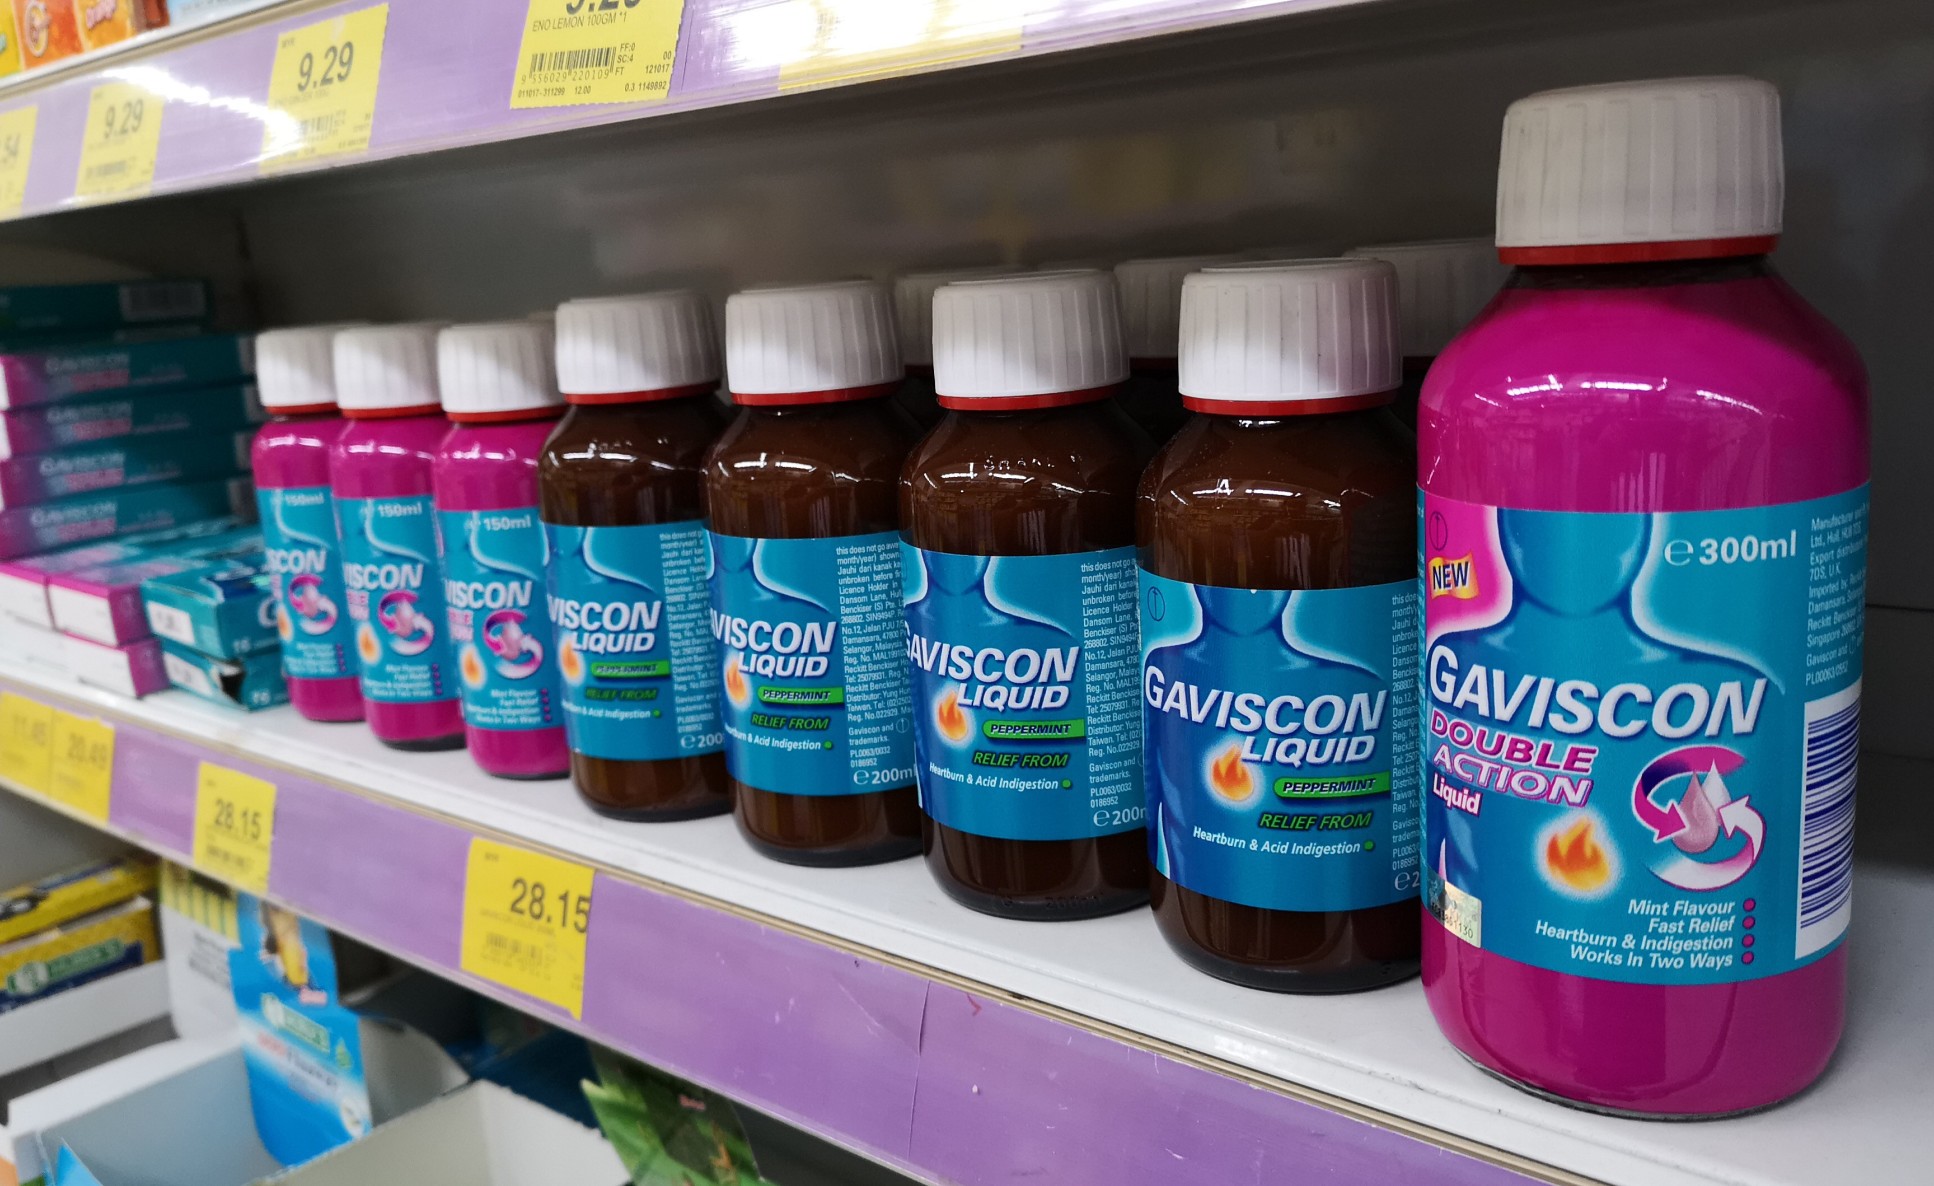 A shelf of Gaviscon indigestion products for sale in a shop.